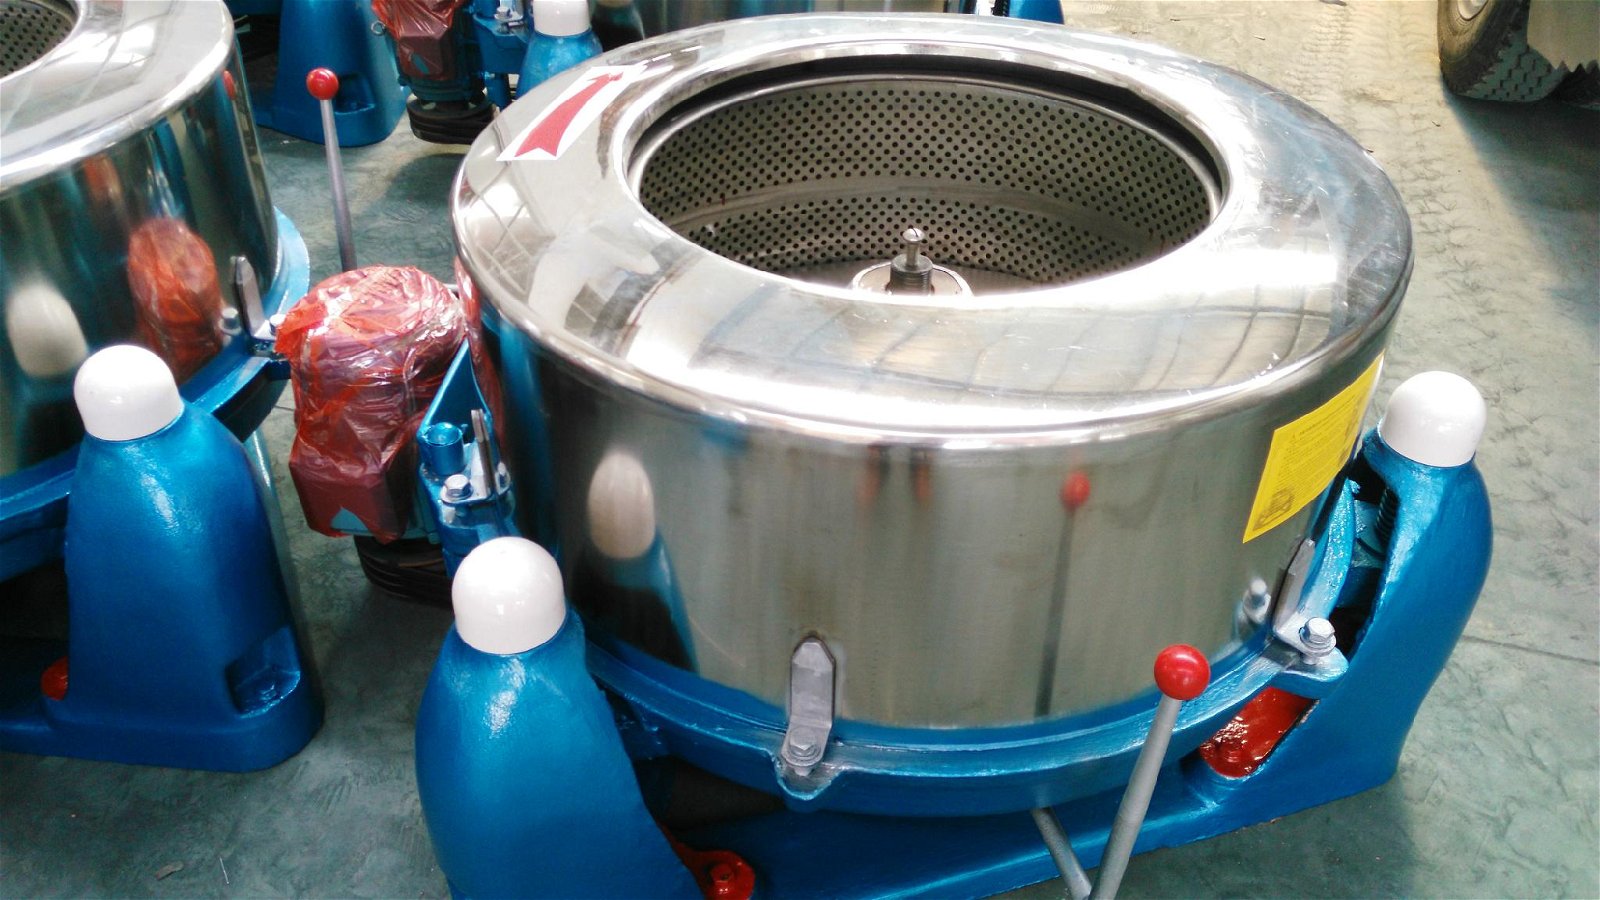 Tl-1200 (210Kg) Spin Dryer /Dewatering Machine for Laundry Busiess 2